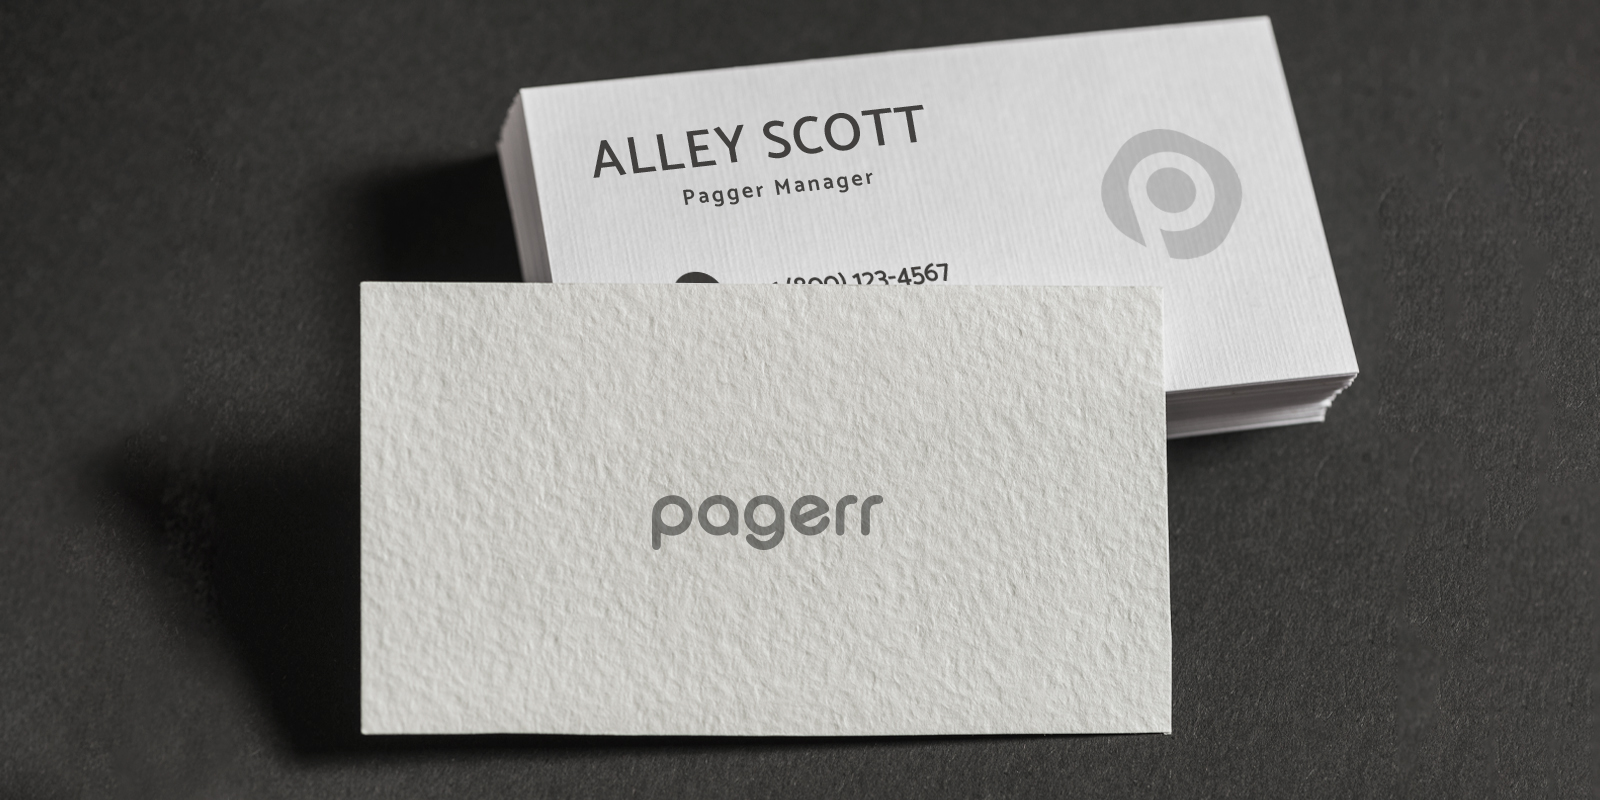 Special material business cards in Seville - Print with Pagerr